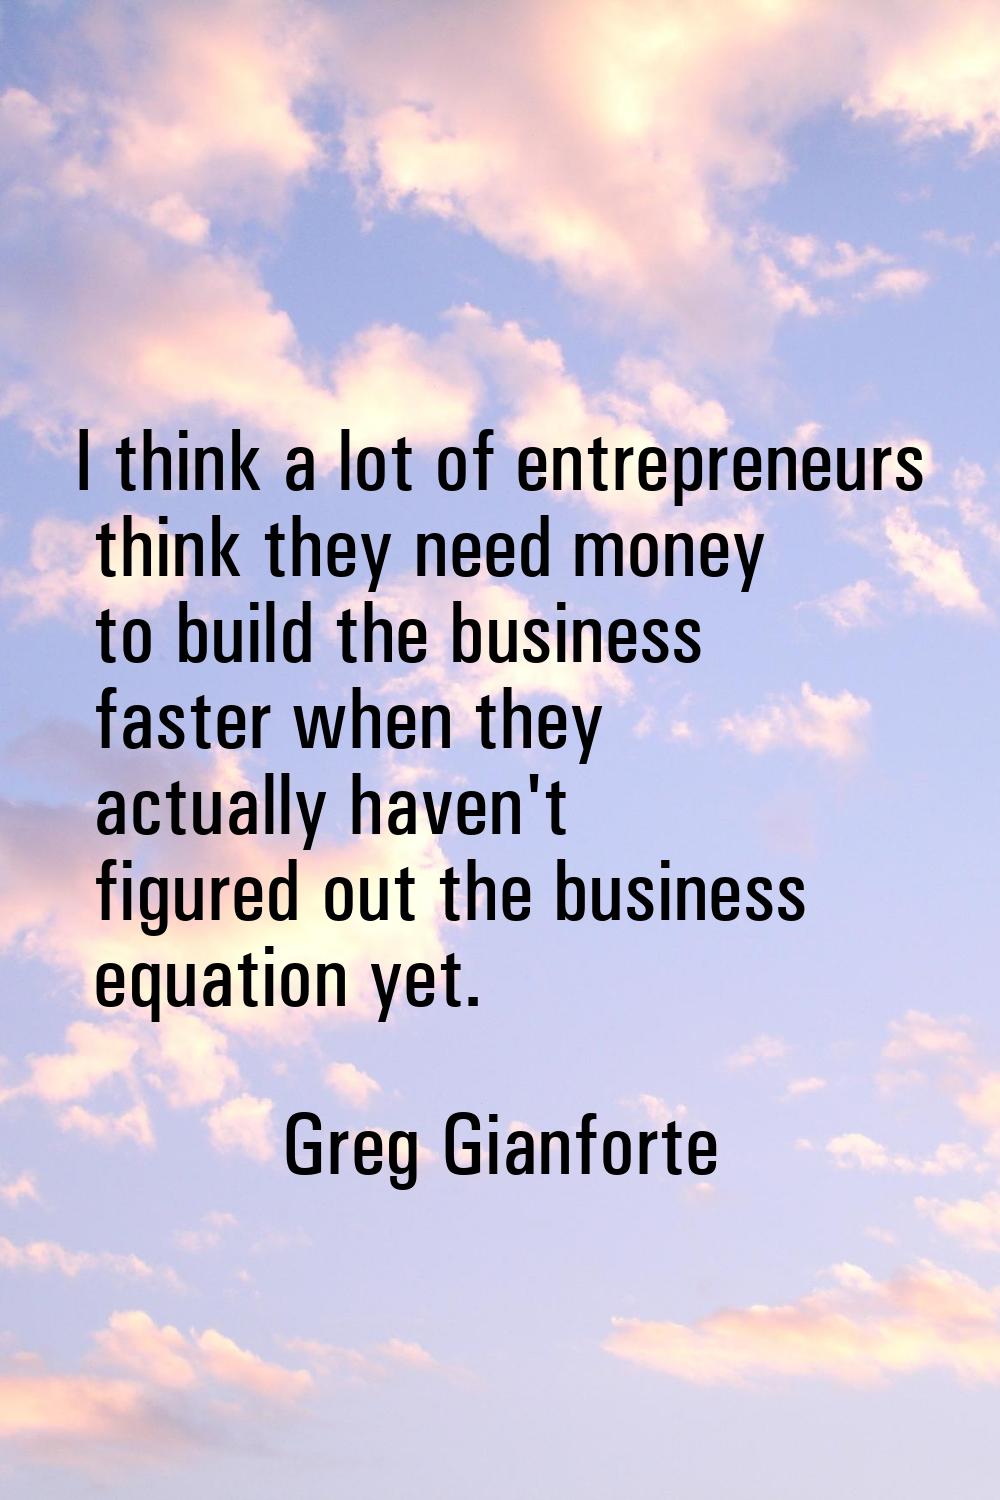 I think a lot of entrepreneurs think they need money to build the business faster when they actuall